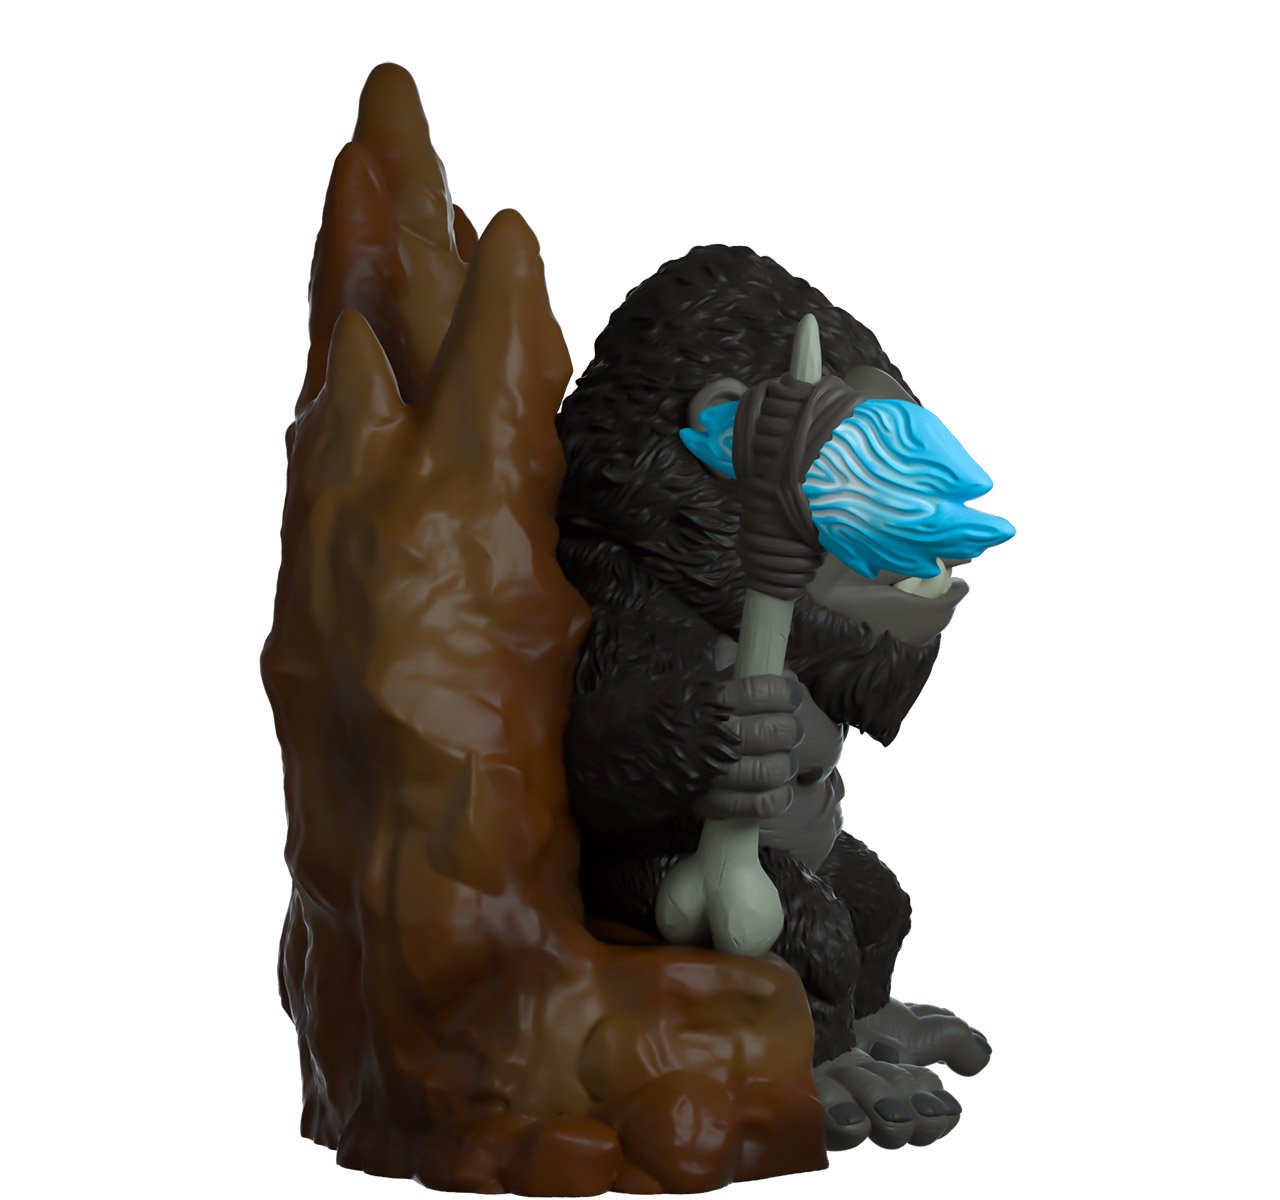 Kong on Throne Toy Figure by Youtooz Collectibles